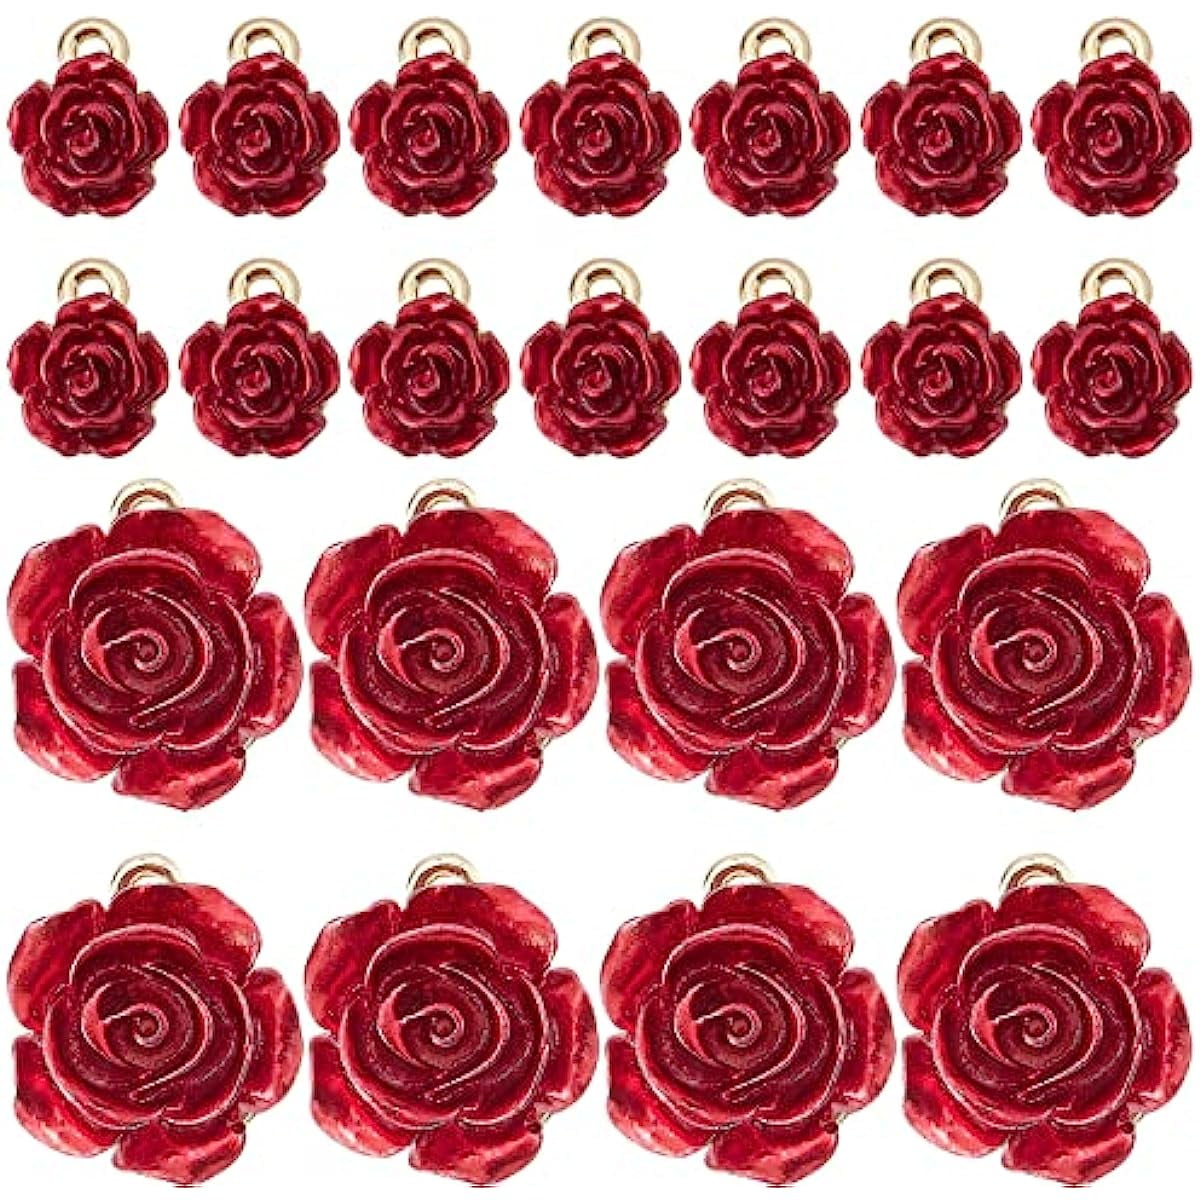 Wholesale DICOSMETIC 12Pcs 3 Colors Rose Flower Charms Stainless